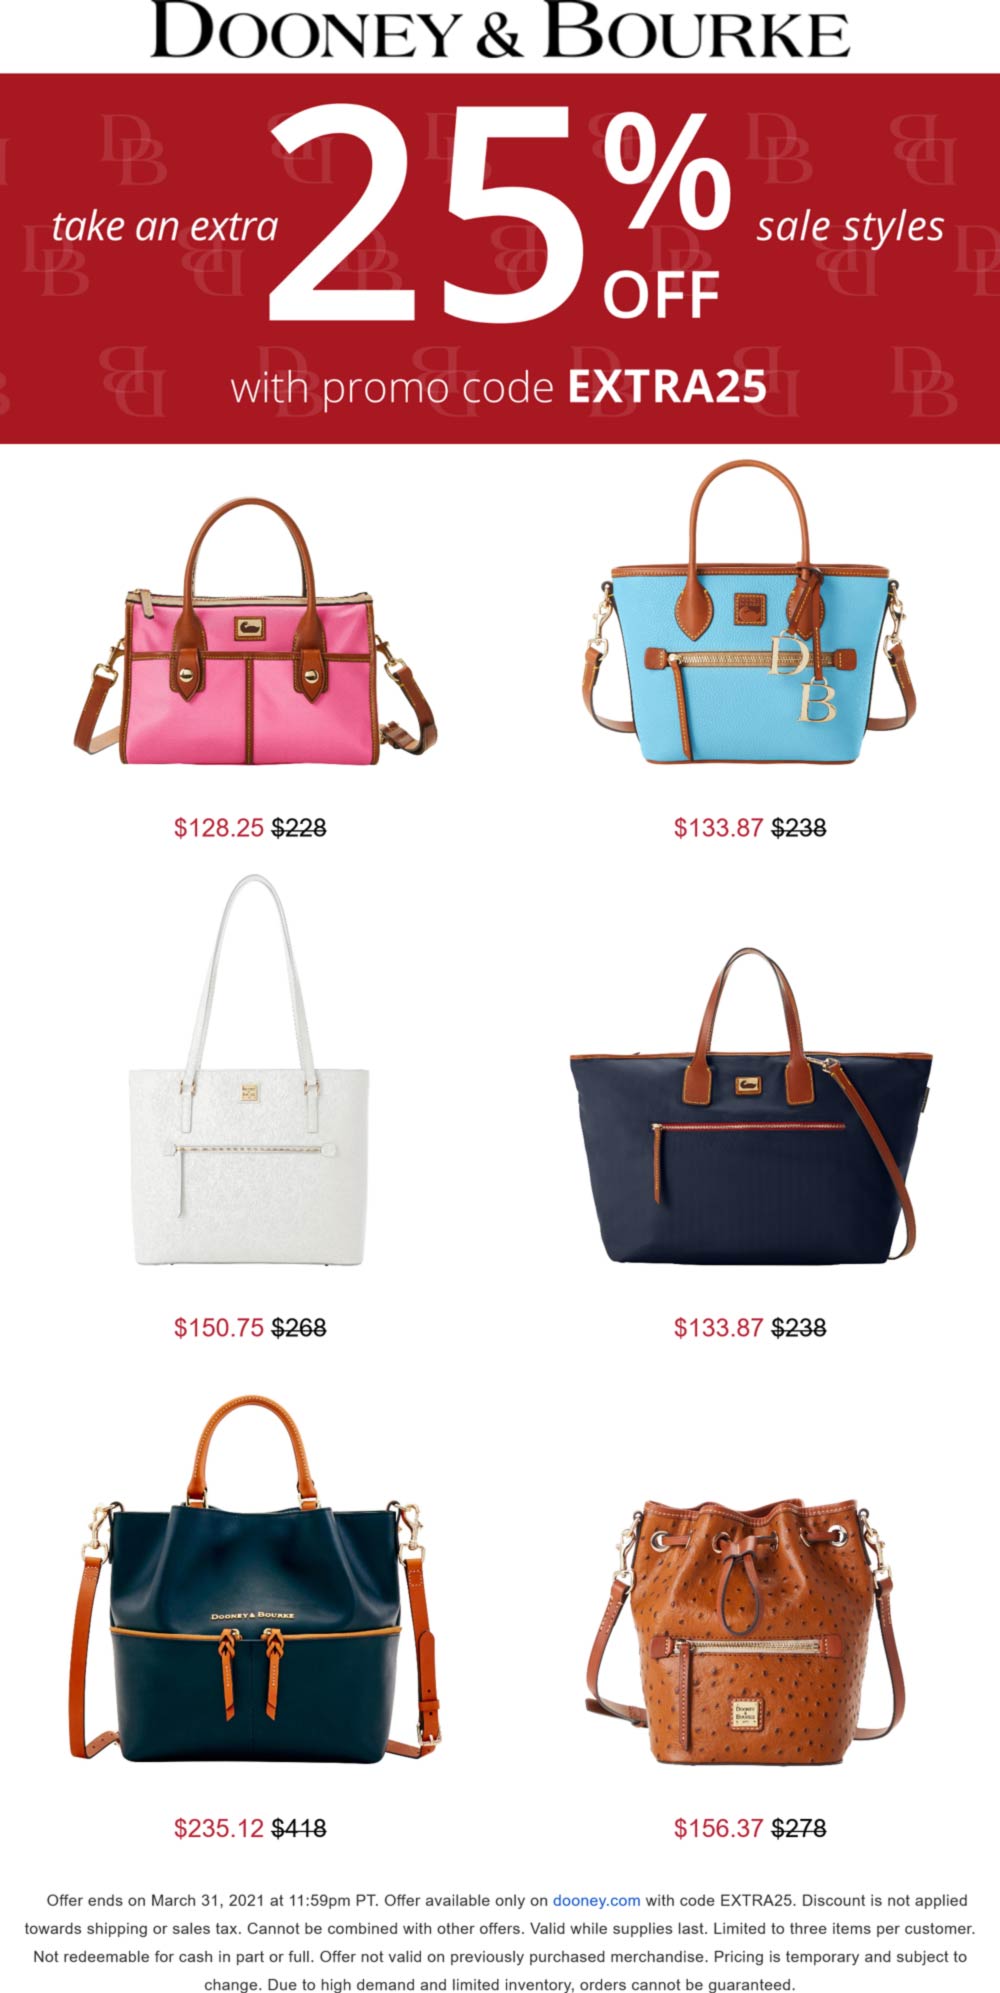 Extra 25 off sale items today at Dooney & Bourke via promo code